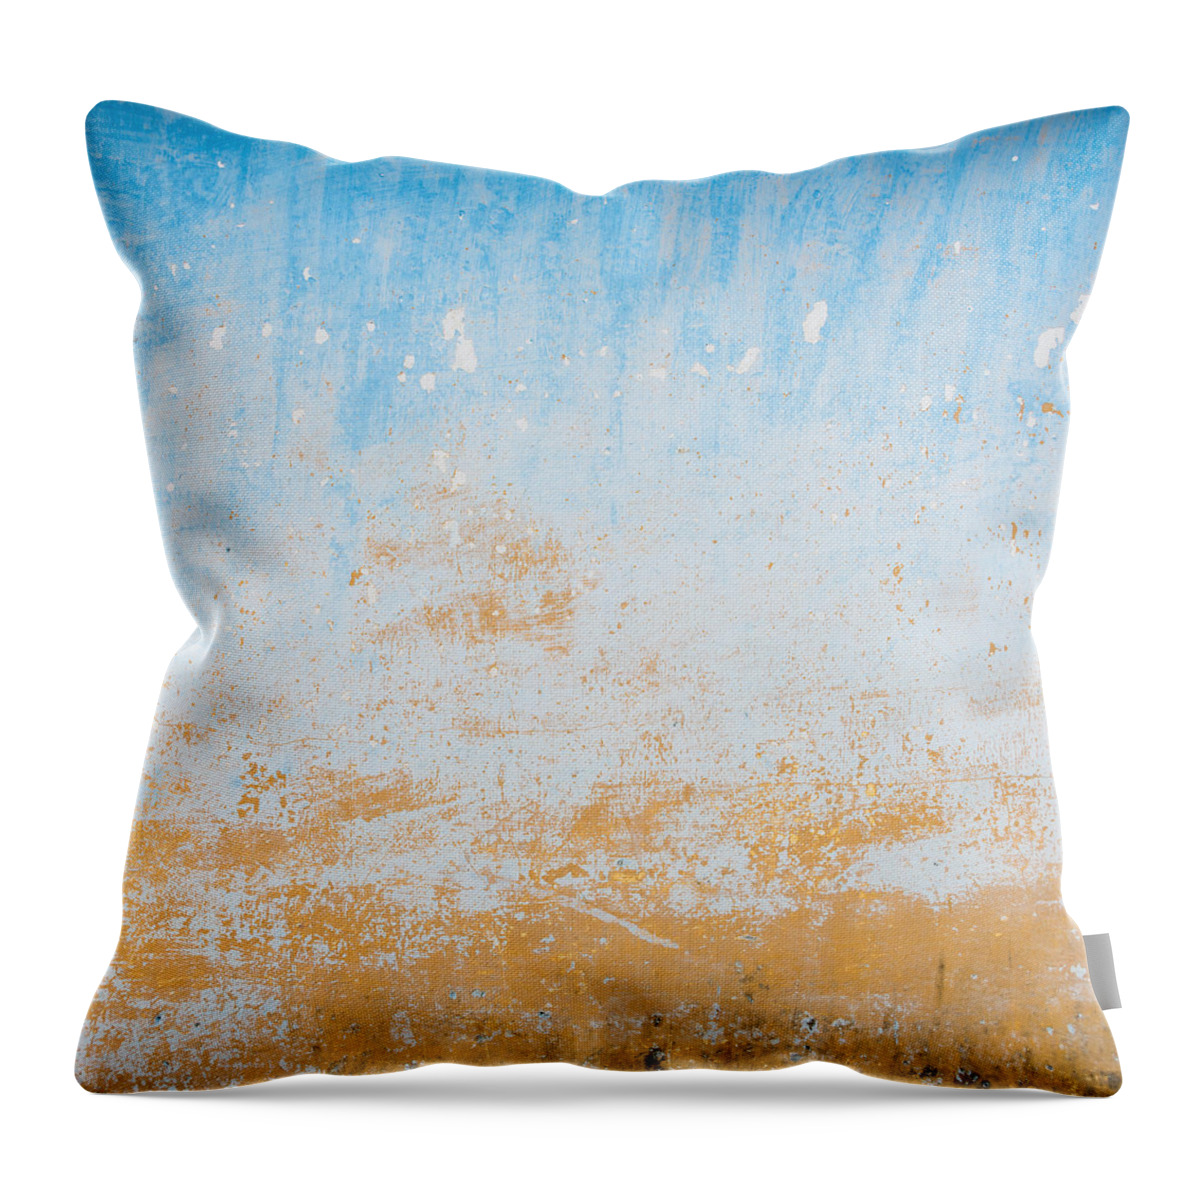 Blue Throw Pillow featuring the photograph Dilapidated beige and blue wall texture by Dutourdumonde Photography